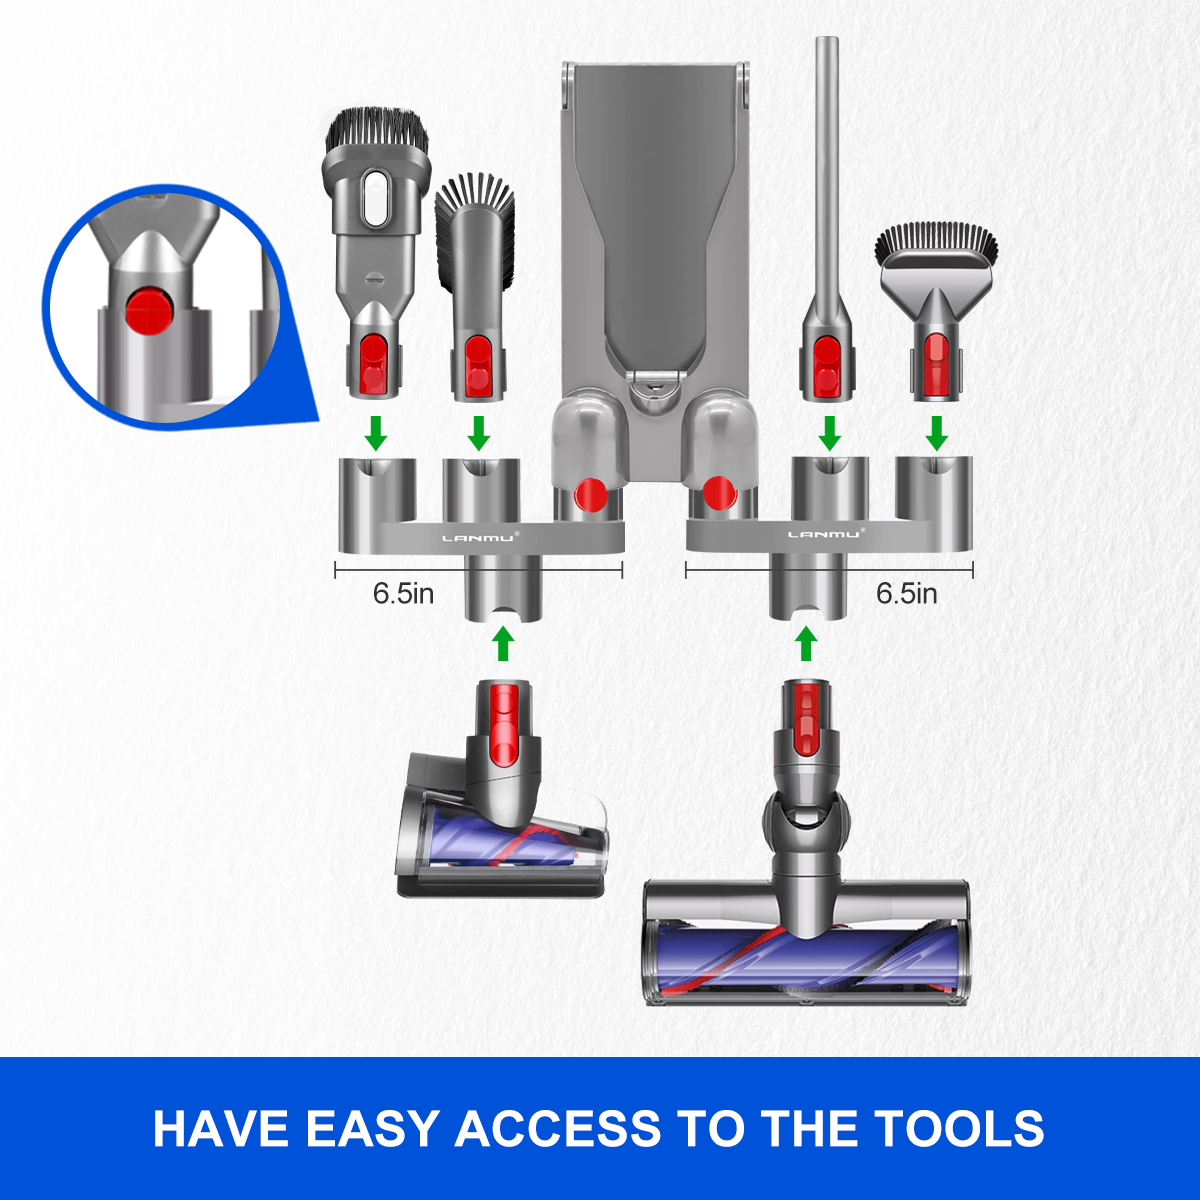 Each LANMU tool holder built-in six adapters with both the left and right side holder